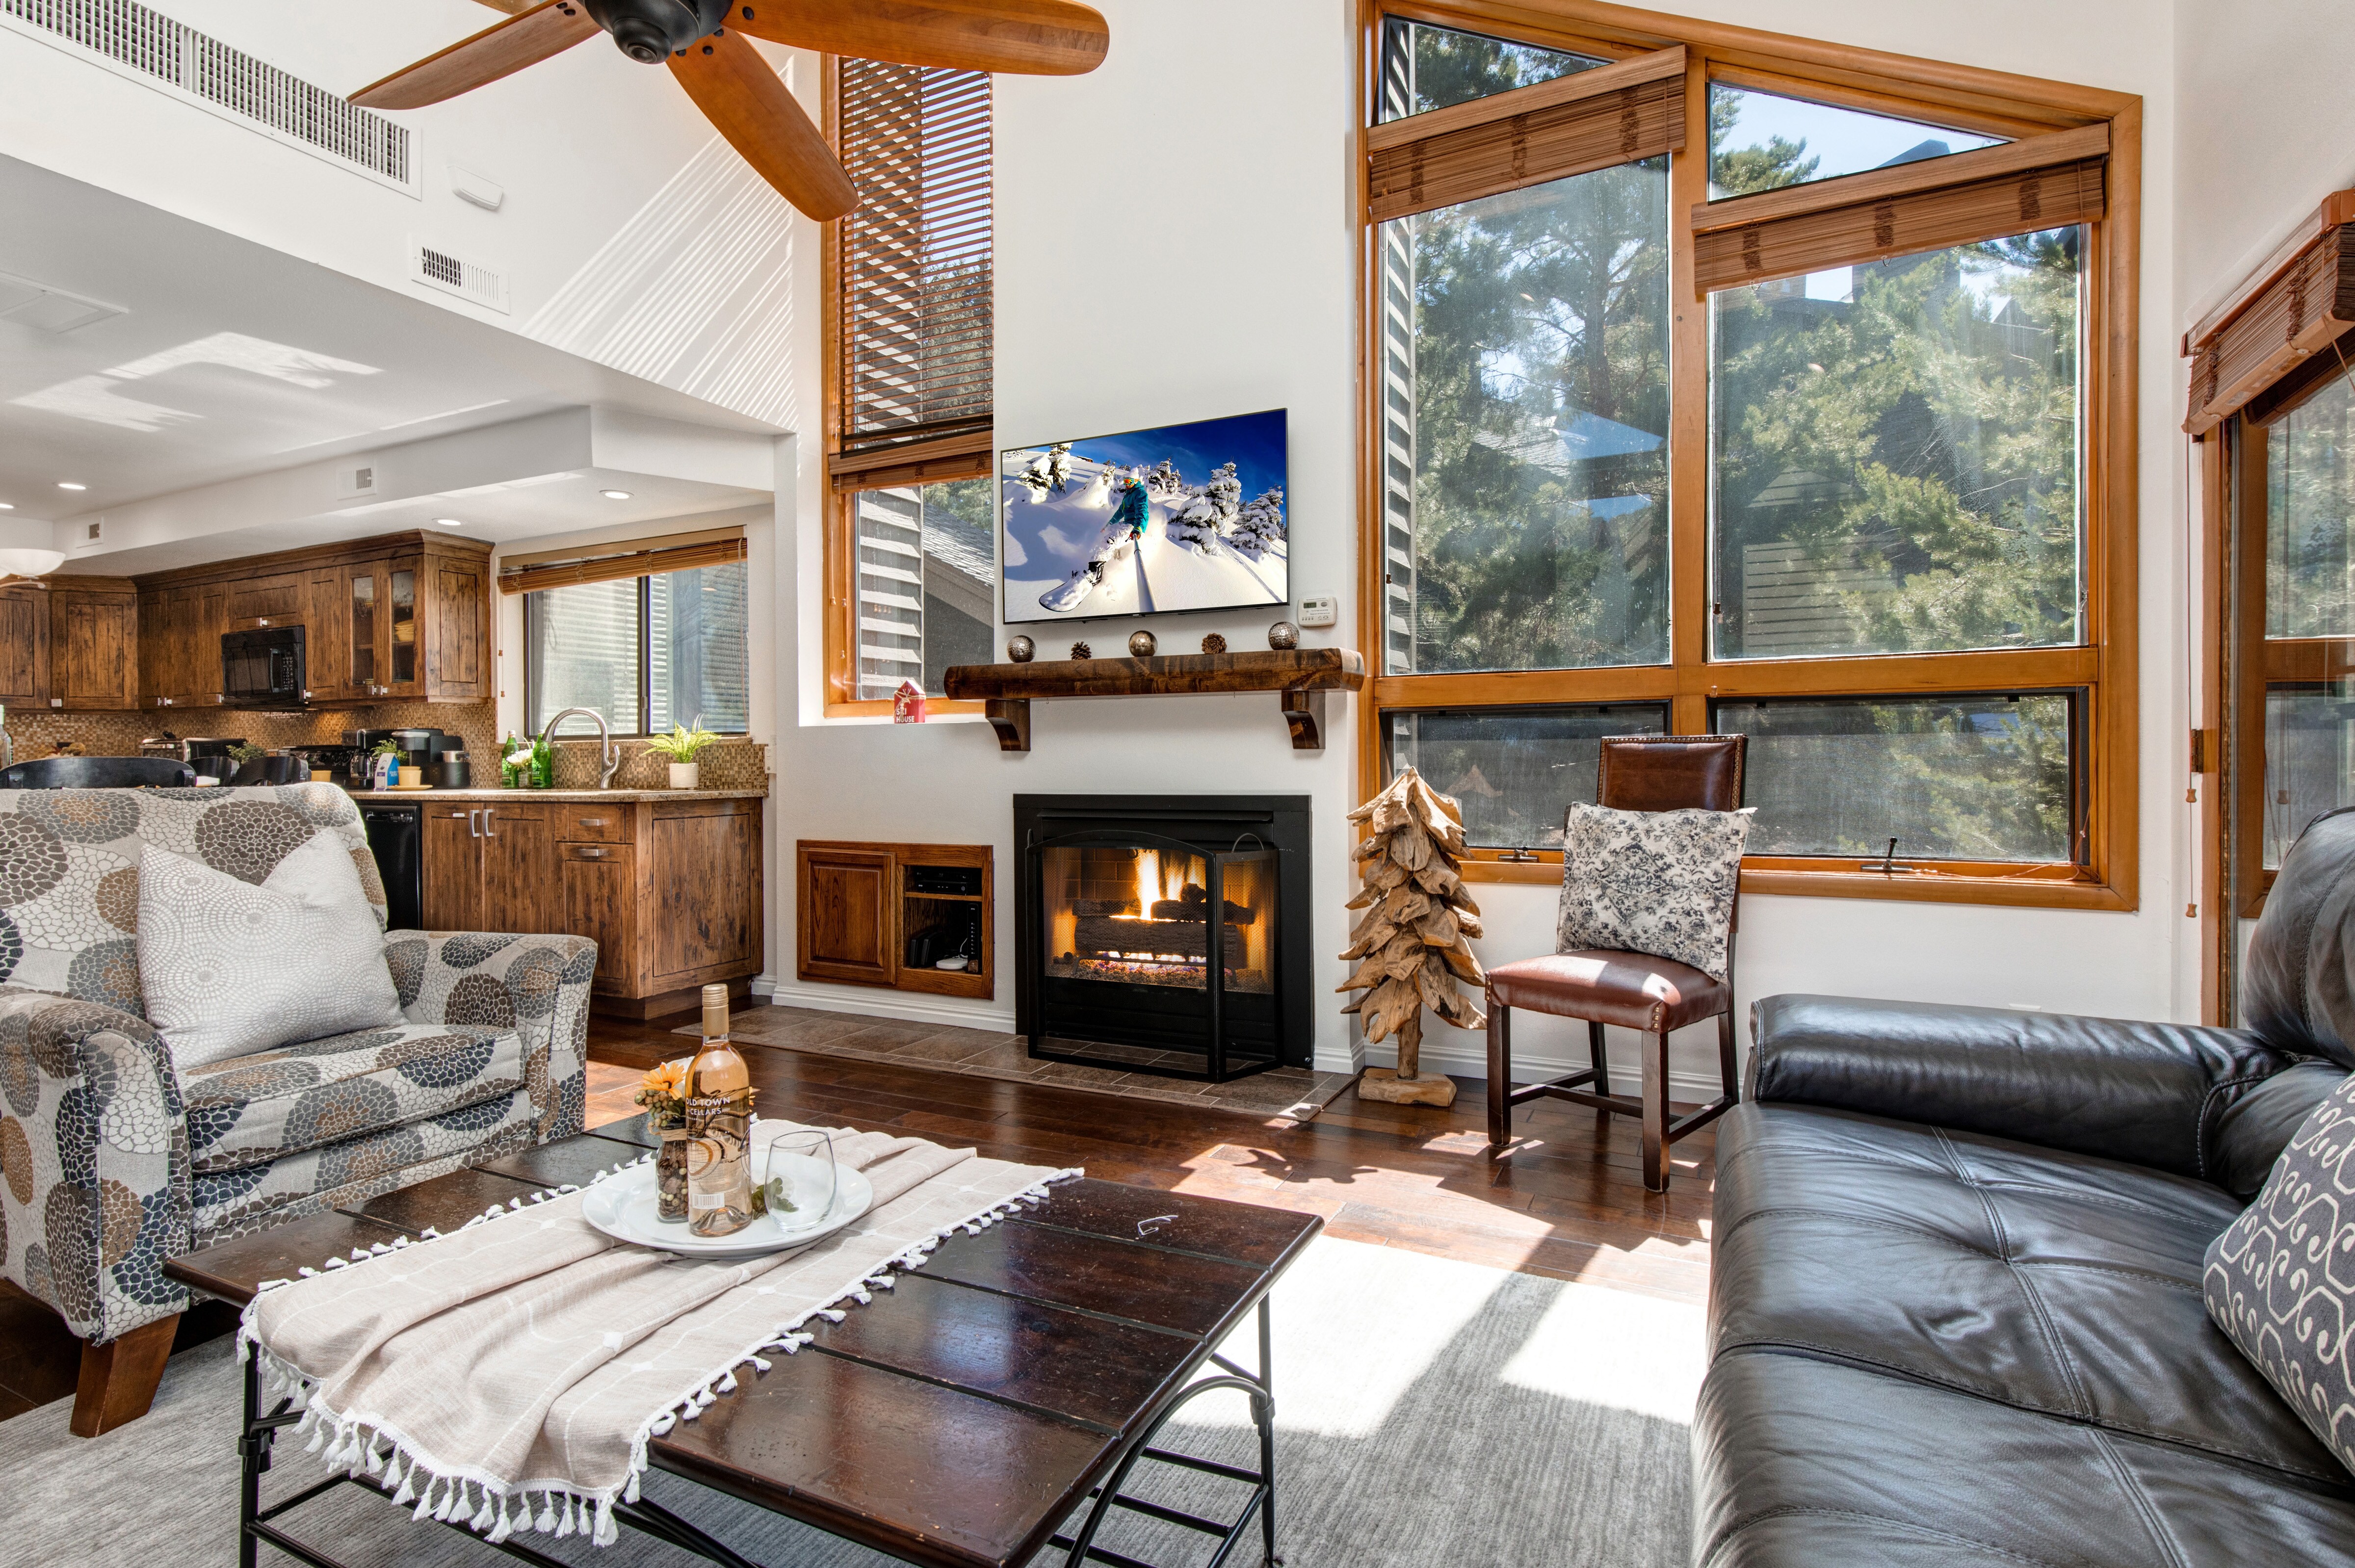 Living Room with gas fireplace, 42" Samsung TV, leather furniture and private deck access